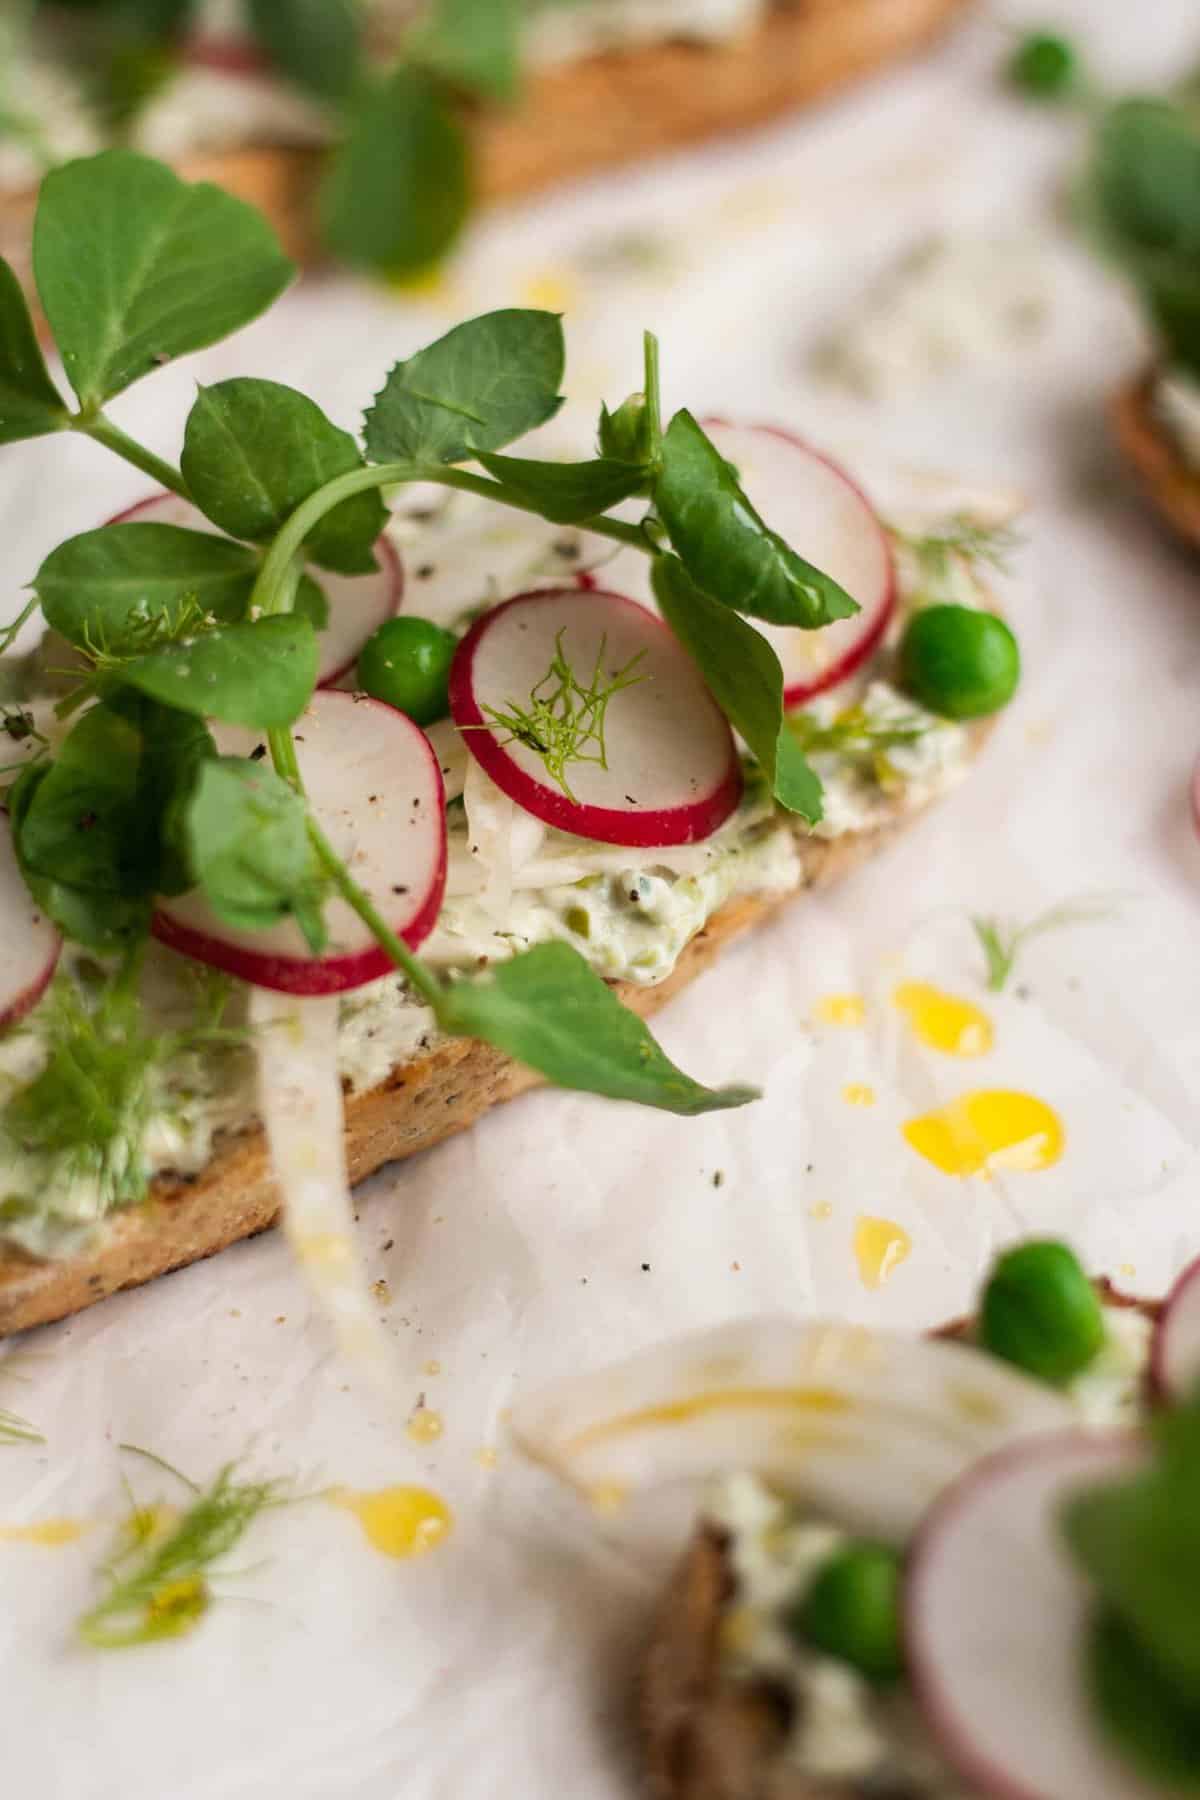 Pea, Radish and Fennel Tartines - this simple appetiser or light lunch recipe is quick and easy and celebrates the delicate flavours of the finest spring produce | eatloveeats.com